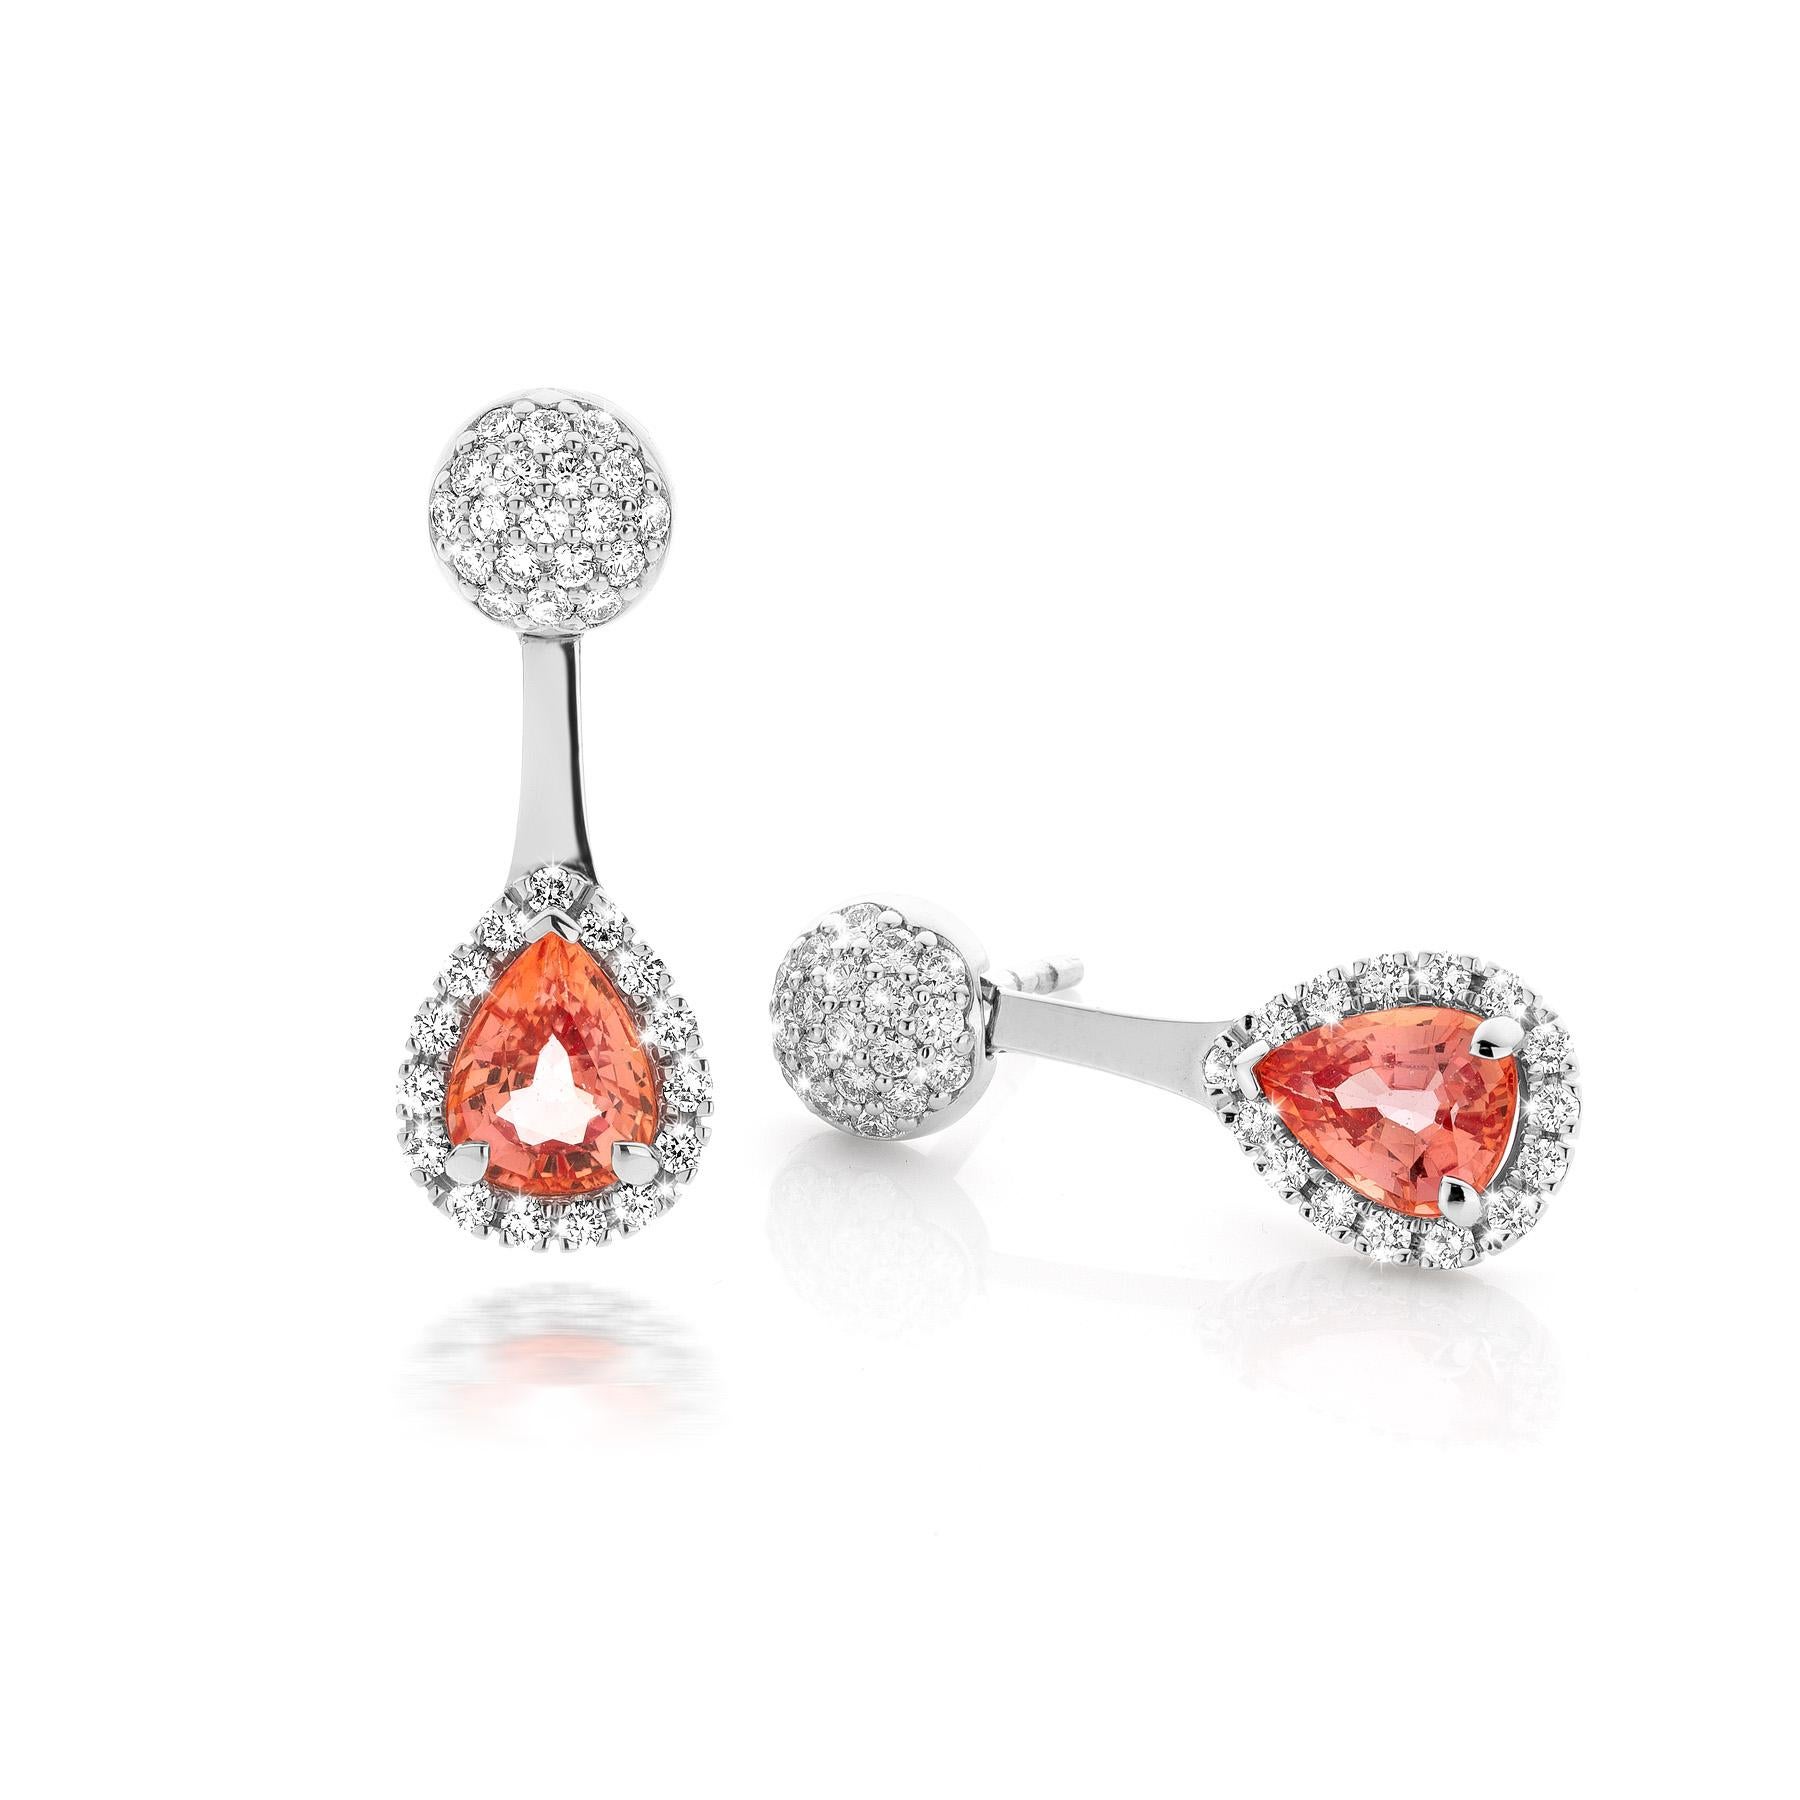 Contemporary Cober with Padparadscha Sapphire surrounded by 15 Diamonds White Gold Earrings For Sale